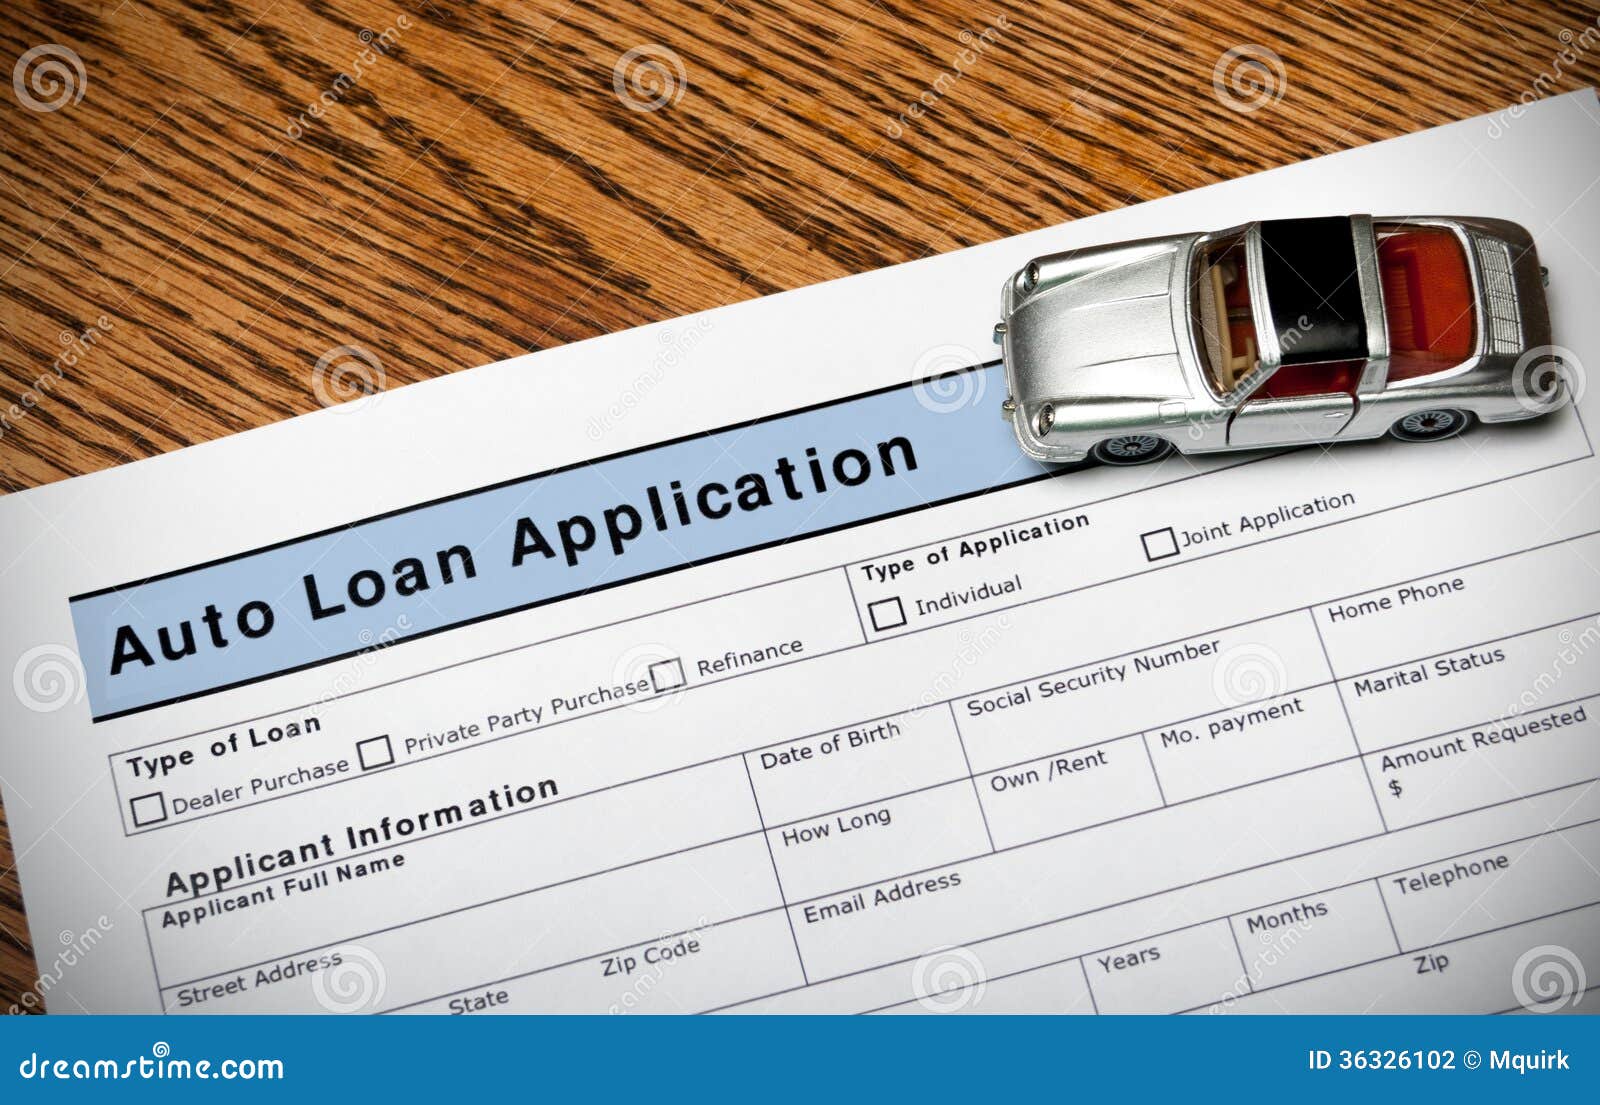 How do you get auto financing online?